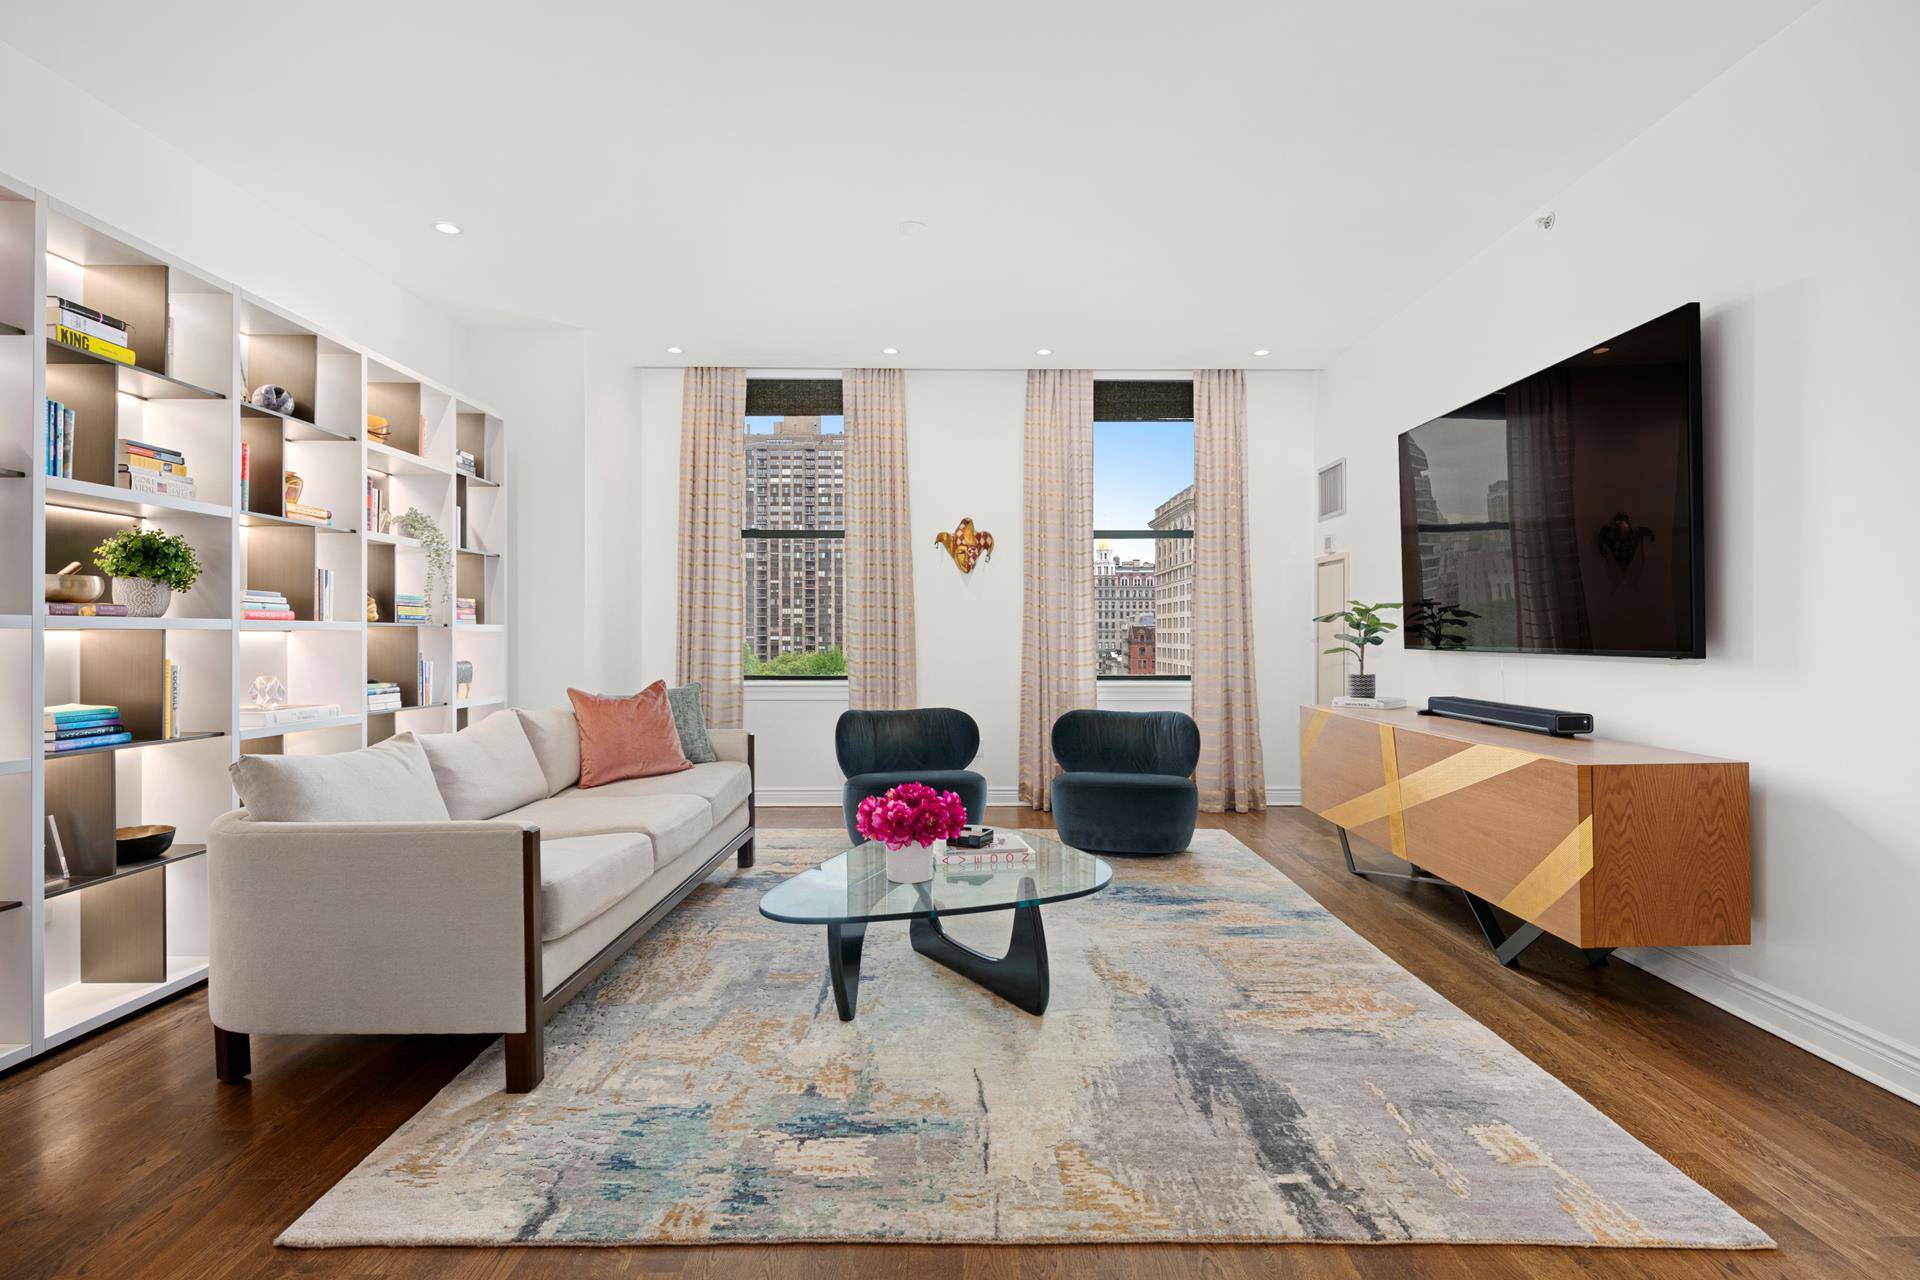 Experience luxury living at its finest in this museum quality two bedroom, two bathroom condominium in the heart of Flatiron with breathtaking front row views of Madison Square Park.